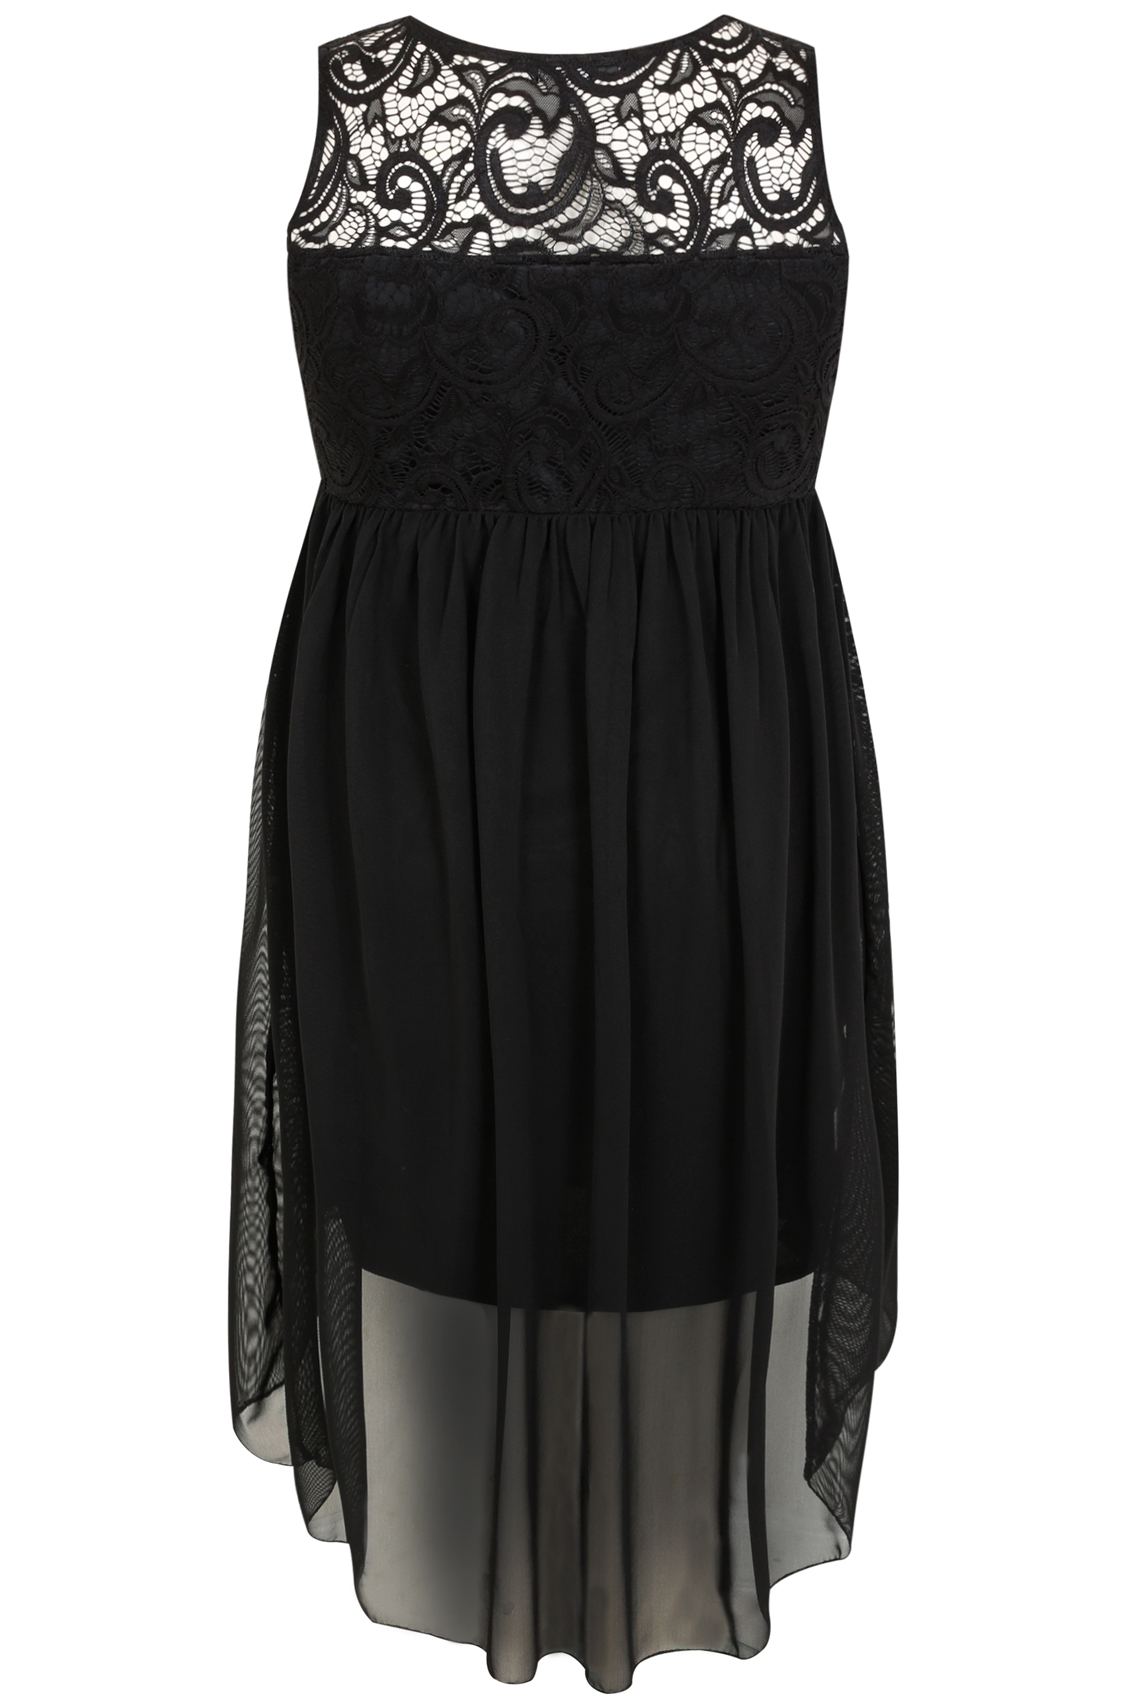 Black Lace & Mesh Sleeveless Dress With Dipped Hem, Plus Size 16 to 32